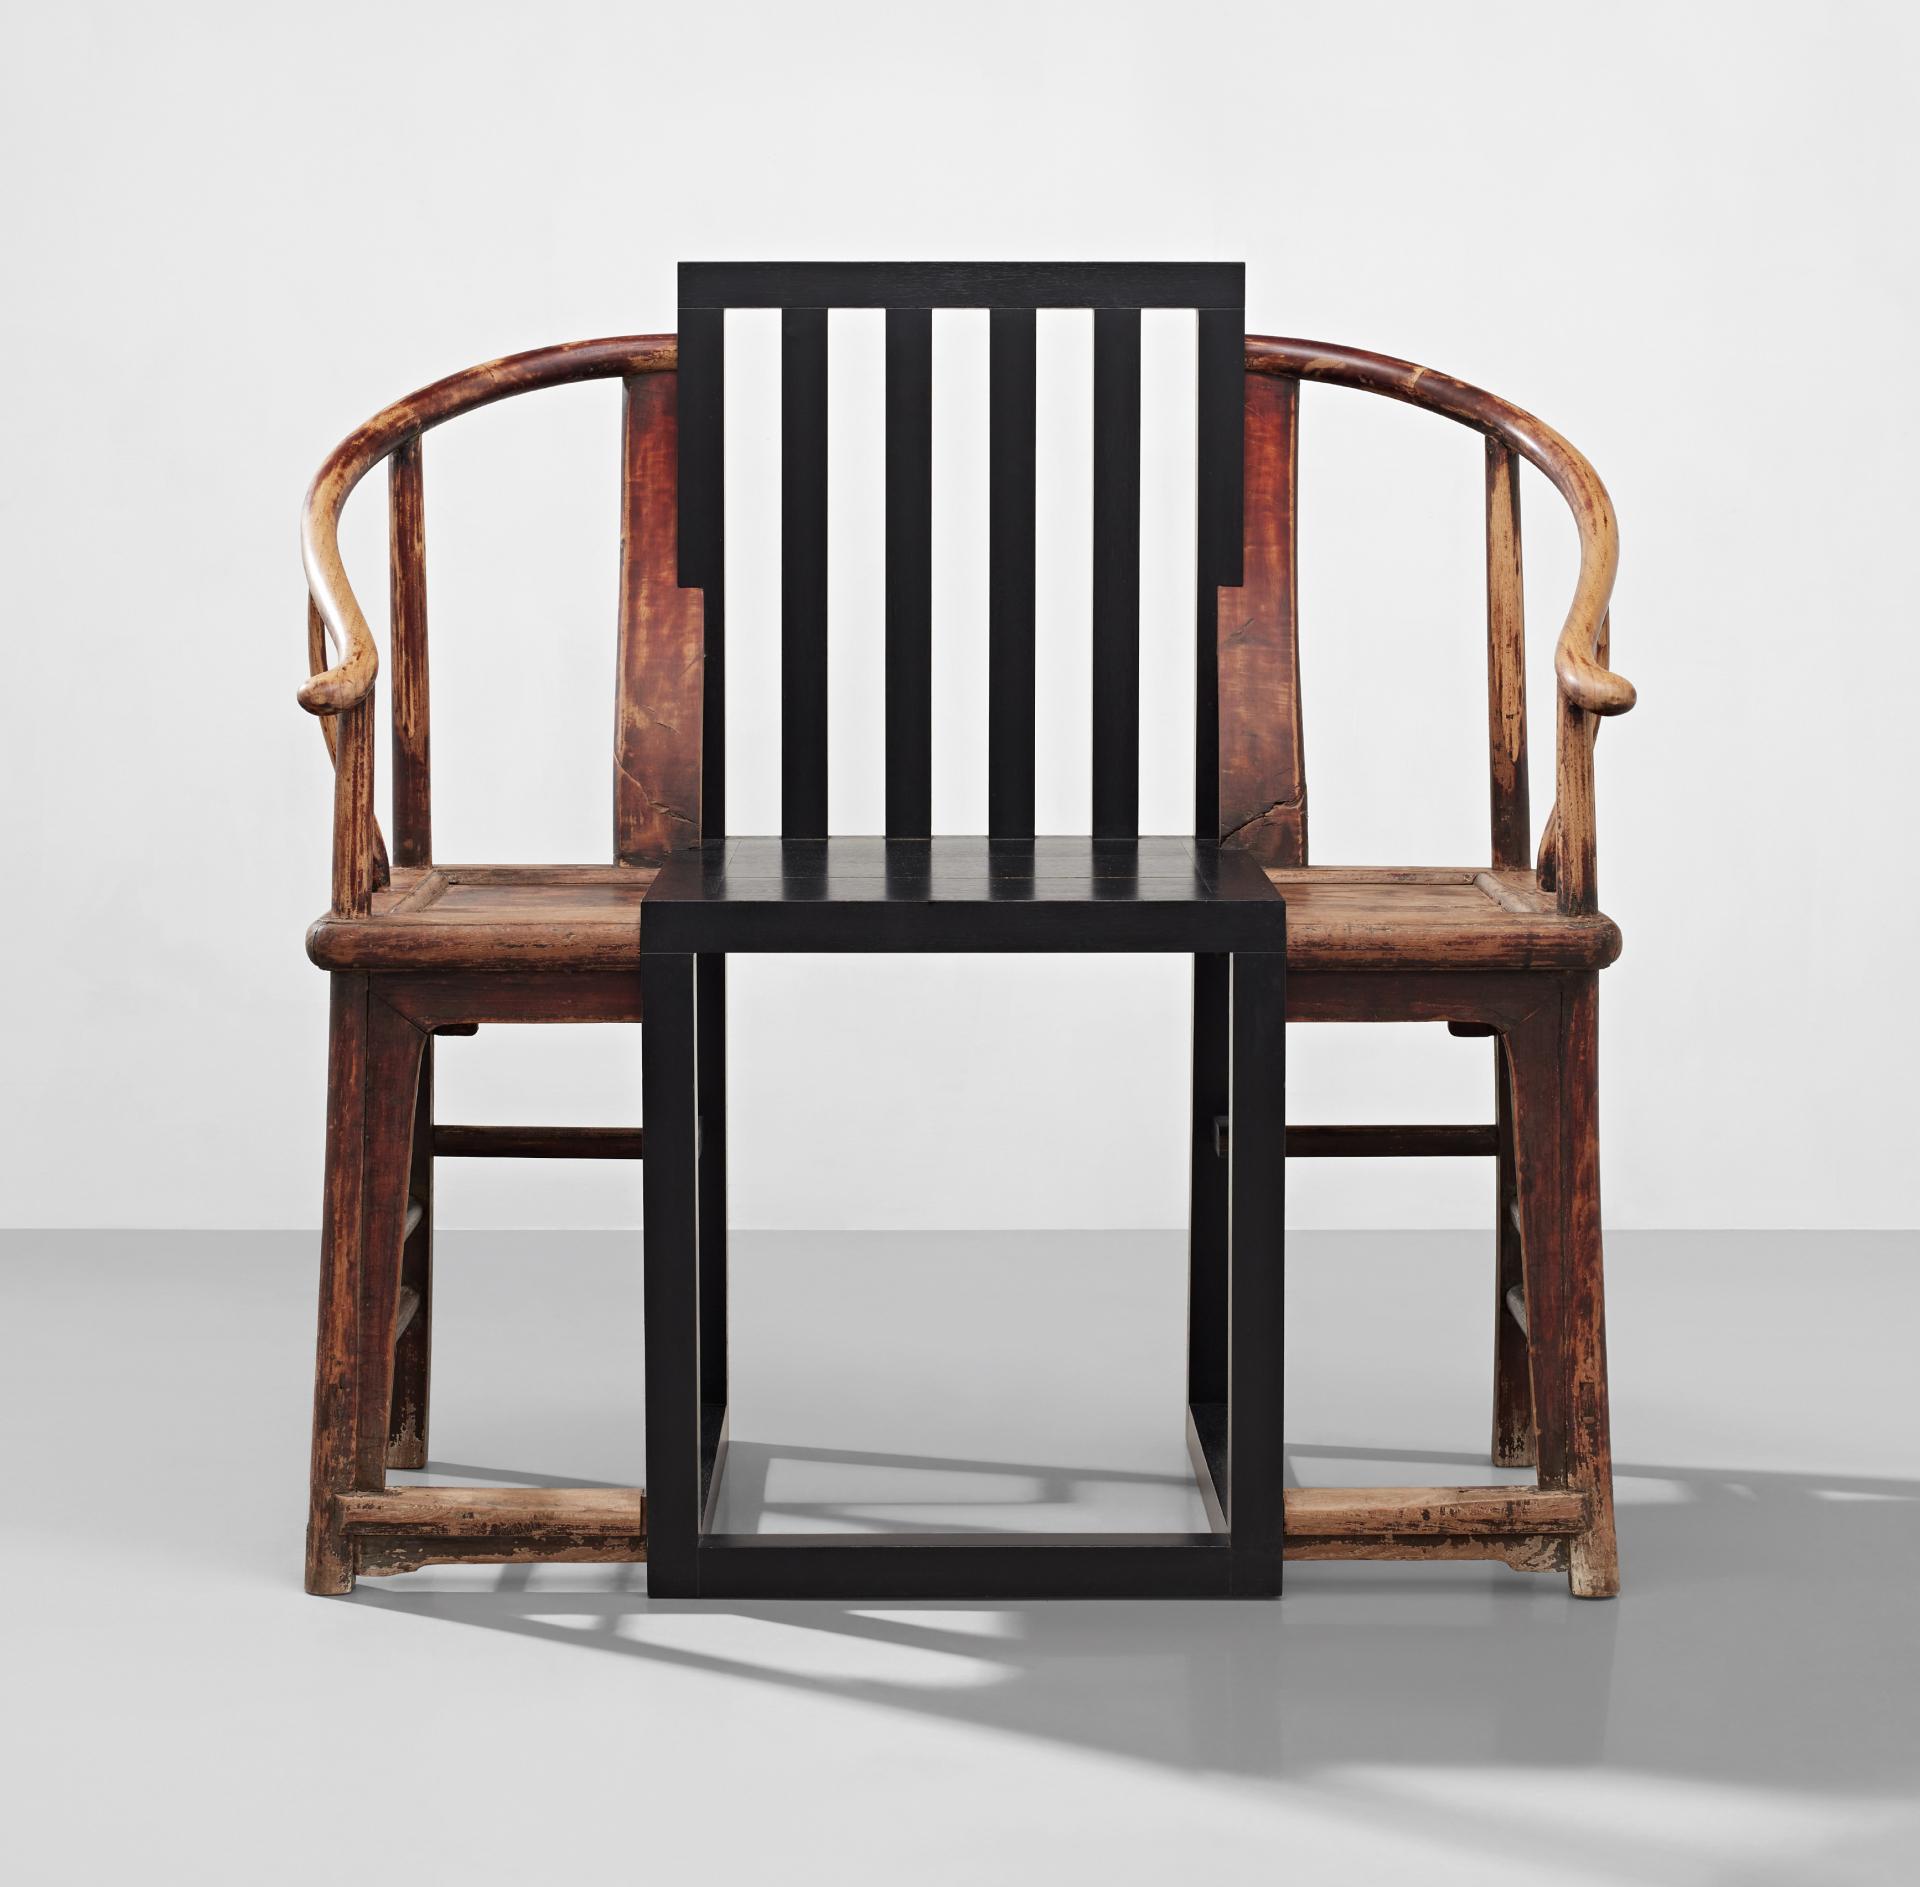 Designer and Historian Kai-Yin Lo’s Magnificent Furniture Collection Goes Under the Hammer at Phillips Auction